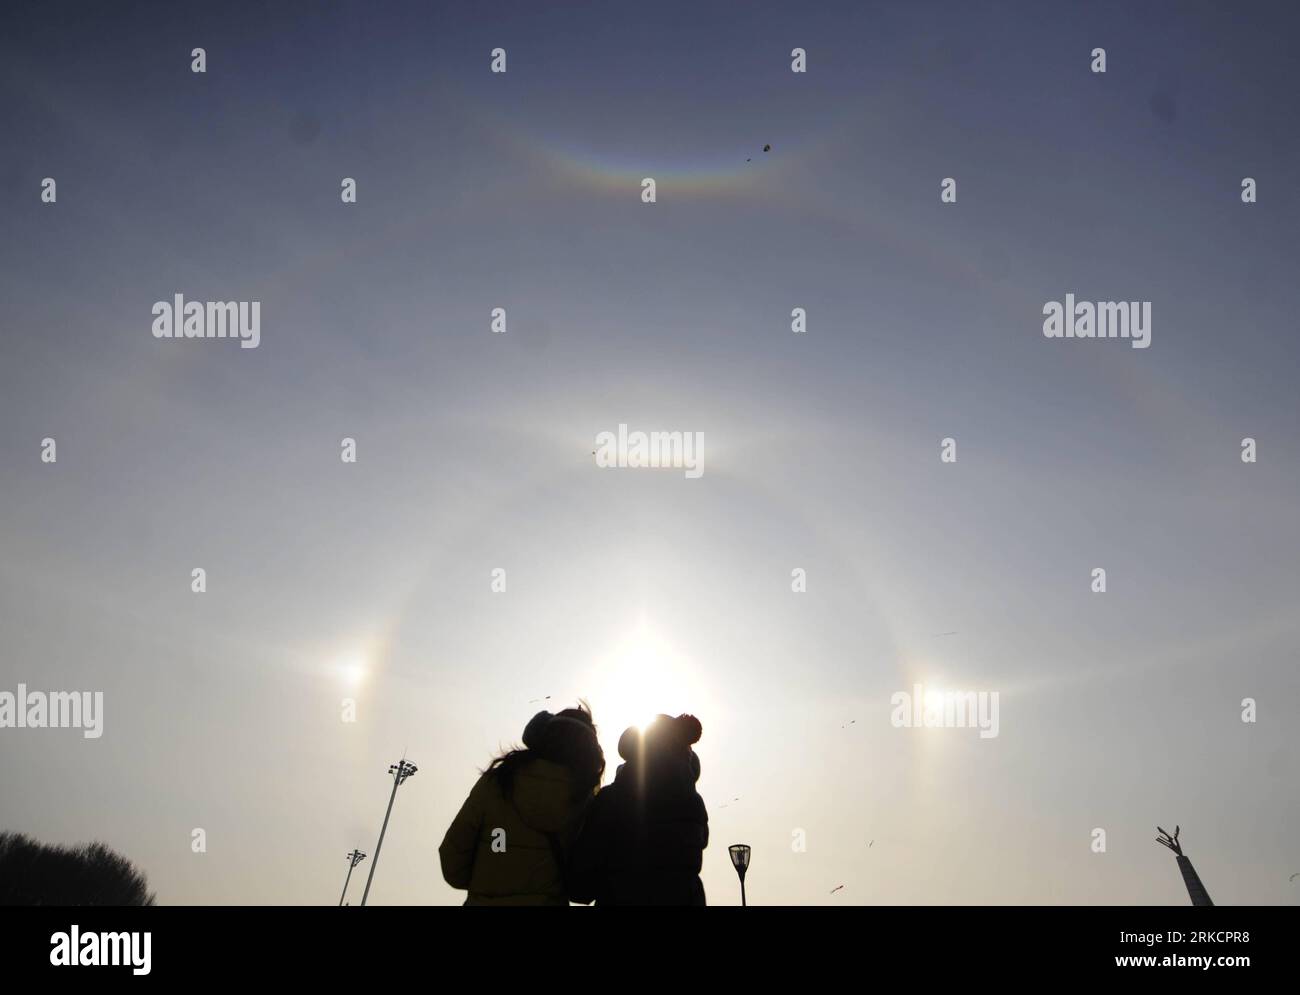 Bildnummer: 54793123  Datum: 08.01.2011  Copyright: imago/Xinhua (110108) -- CHANGCHUN, Jan. 8, 2011 (Xinhua) -- A parhelion (sundog) combined with a halo is seen in Changchun, capital of northeast China s Jilin Province, Jan. 8, 2011. The weather phenomenon is created by ice crystals in the atmosphere during a cold weather period. (Xinhua/Lin Hong) (lb) CHINA-JILIN-CHANGCHUN-NATURE PHENOMENON-PARHELION (CN) PUBLICATIONxNOTxINxCHN Gesellschaft Naturphänomen premiumd Aufmacher kbdig xkg 2011 quer  o0 Nebensonne, Nebensonnen, Parhelia, Wetterphänomen, Gegenlicht    Bildnummer 54793123 Date 08 01 Stock Photo